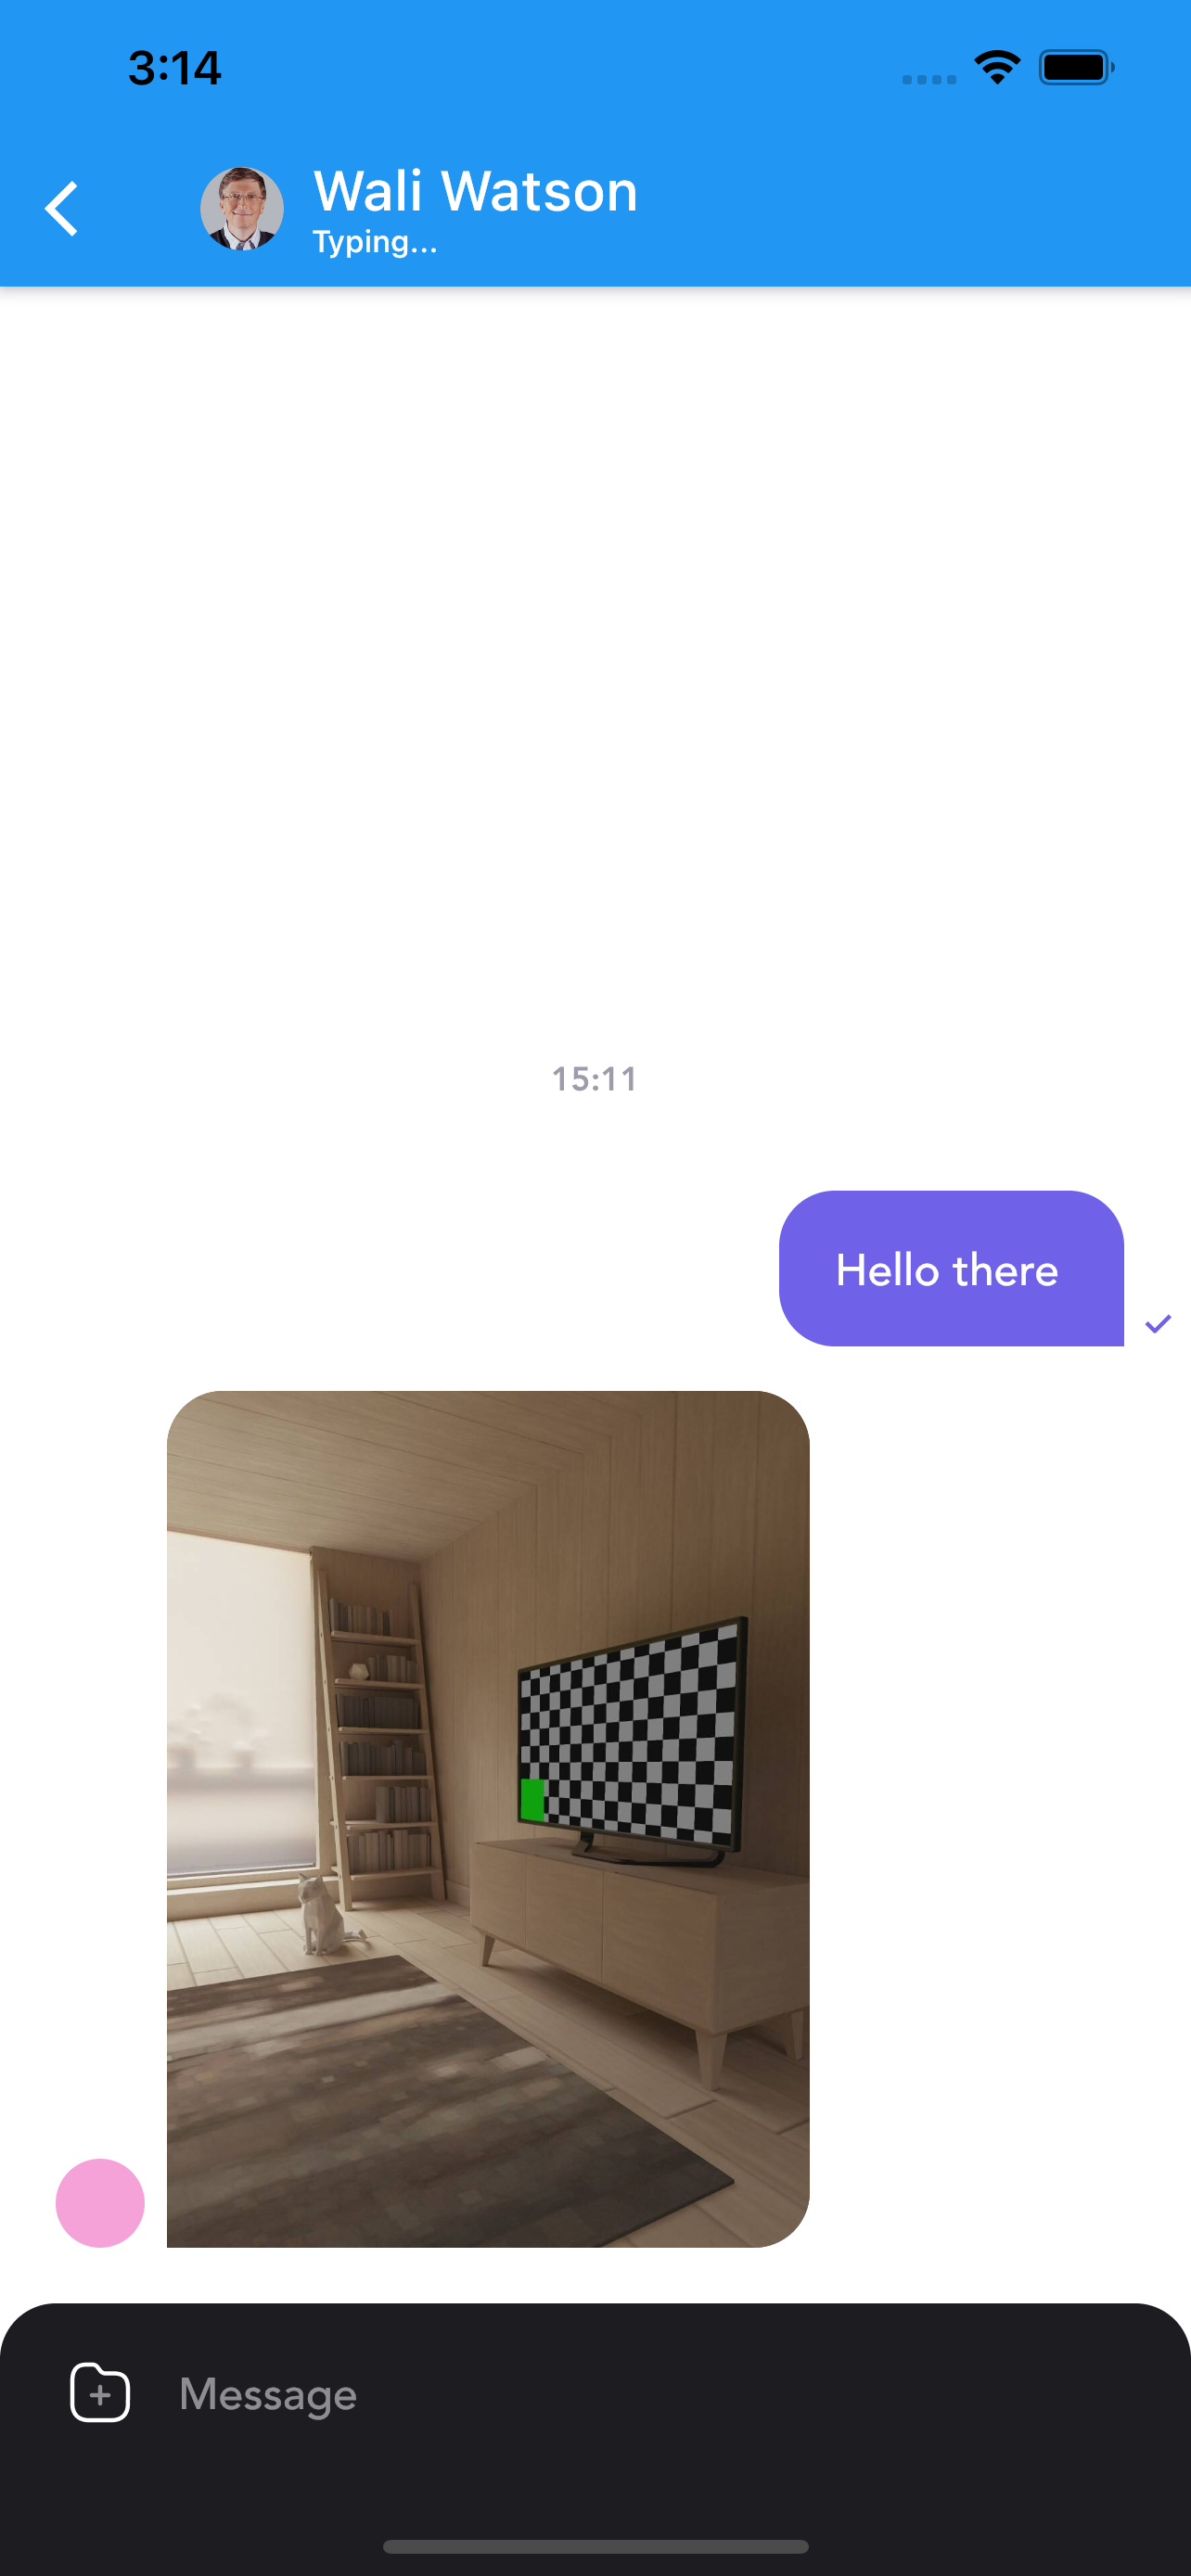 A Chat App Developed Uses Flutter And MQTT Protocol